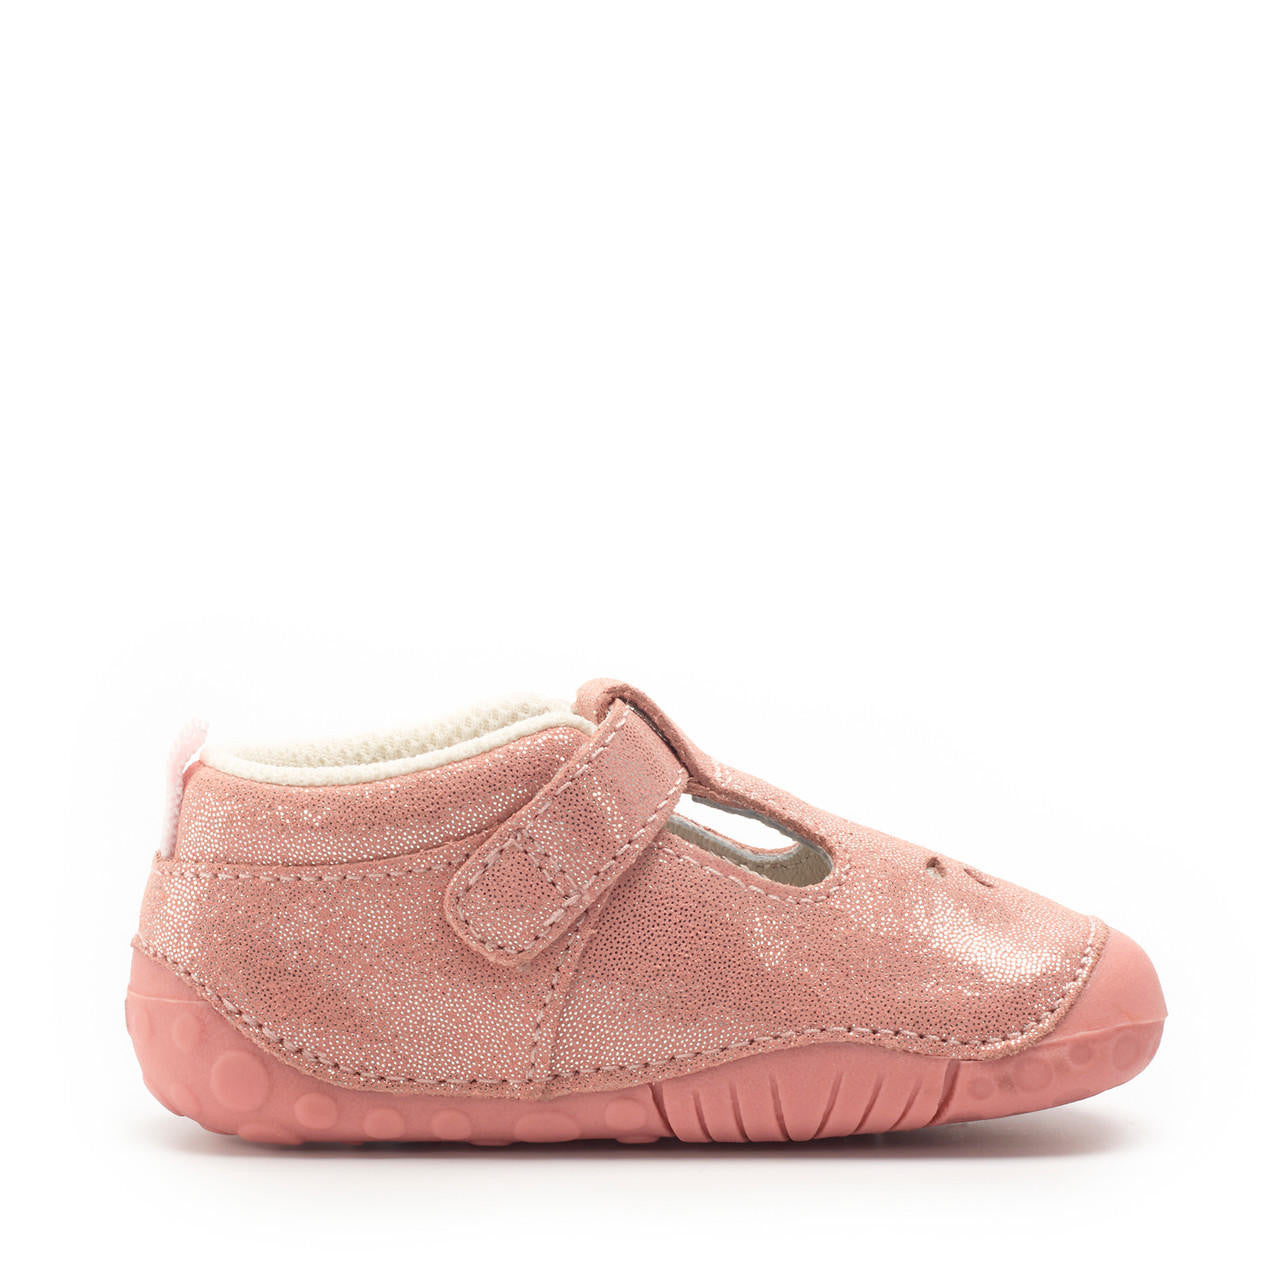 A girls pre-walker by Start-Rite, style Baby Bubble in coral glitter, with buckle fastening. Left side view.